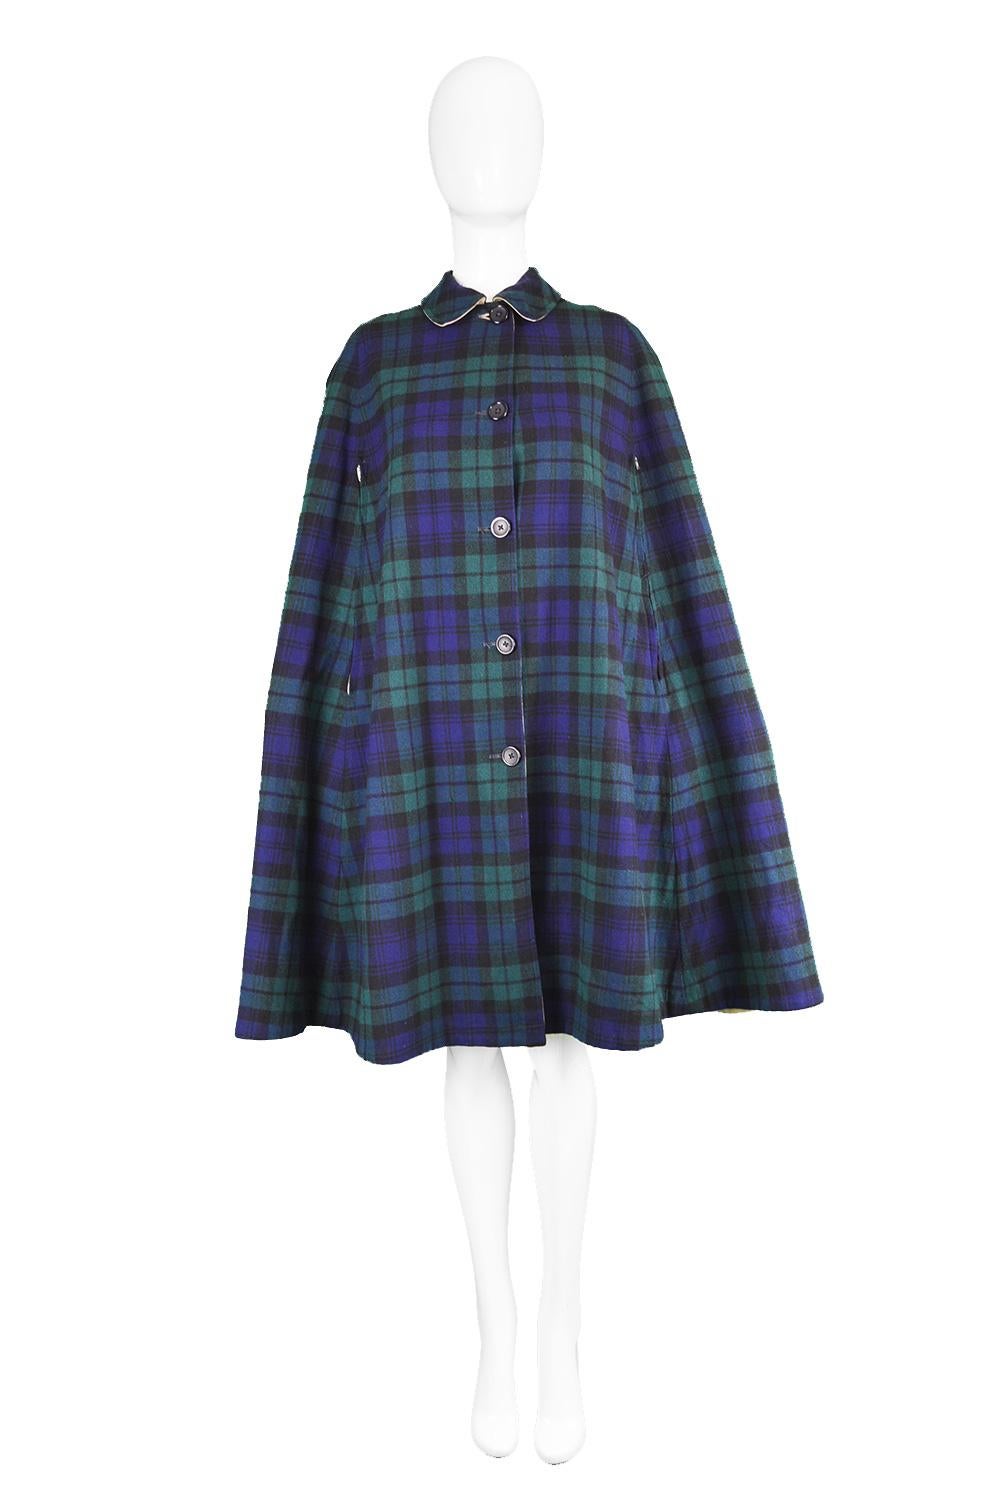 Burberry Vintage 1960s Reversible Trenchcoat Gabardine & Wool Plaid Cloak 

Size: One Size fits most. Please click 'Continue Reading' below to see full measurements and description. 
Bust -Free up to 58” / 147cm
Waist - Free
Hips - Free
Length